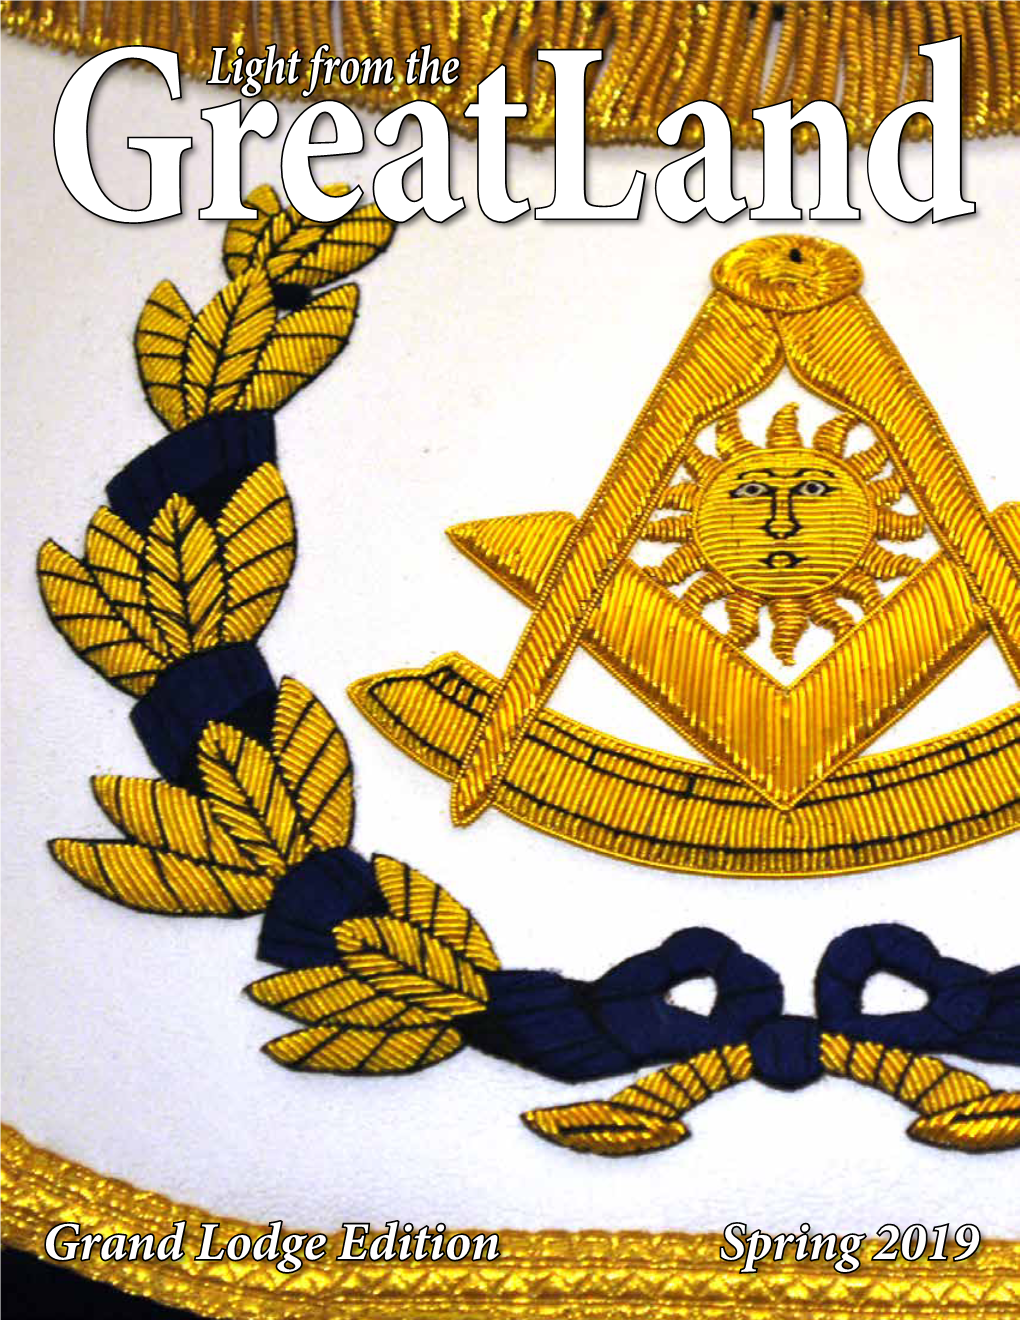 Light from the Spring 2019 Grand Lodge Edition